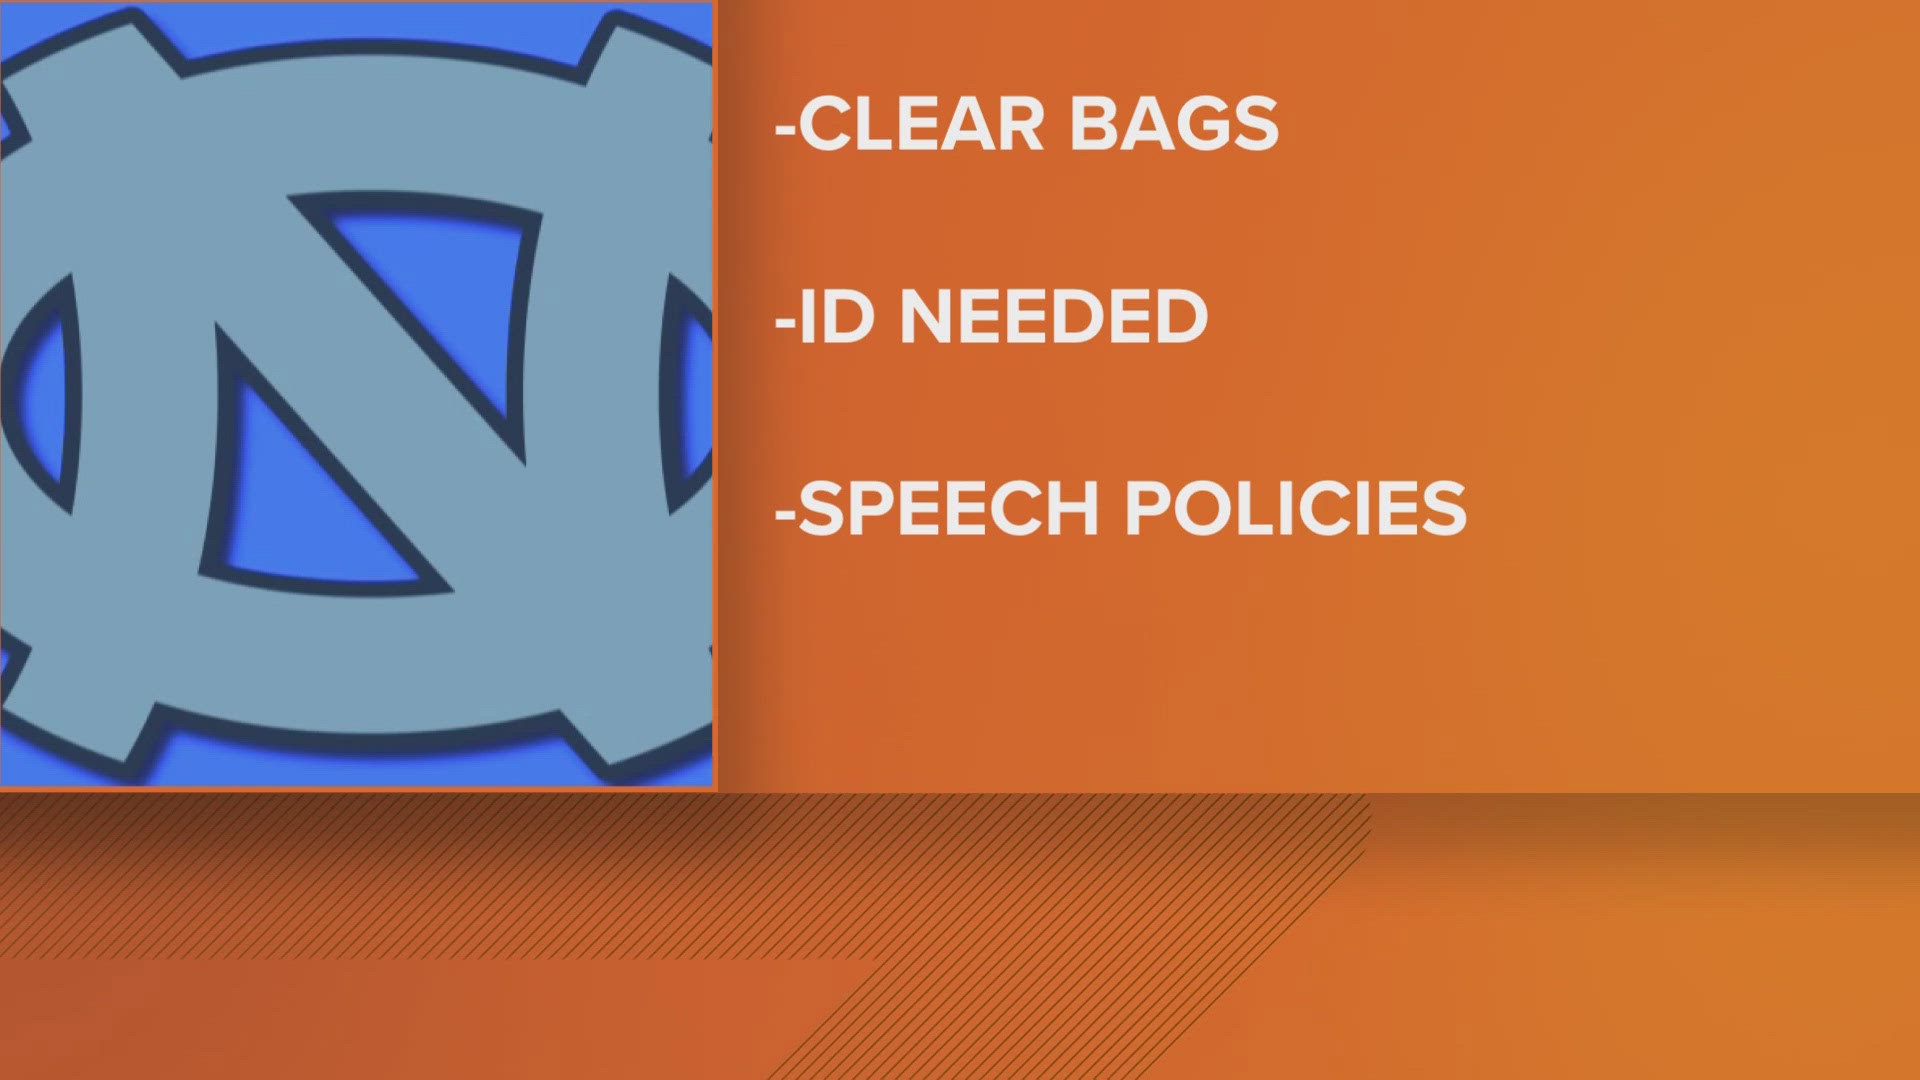 Clear bags and IDs are needed for this year's ceremonies due to protests on campus.